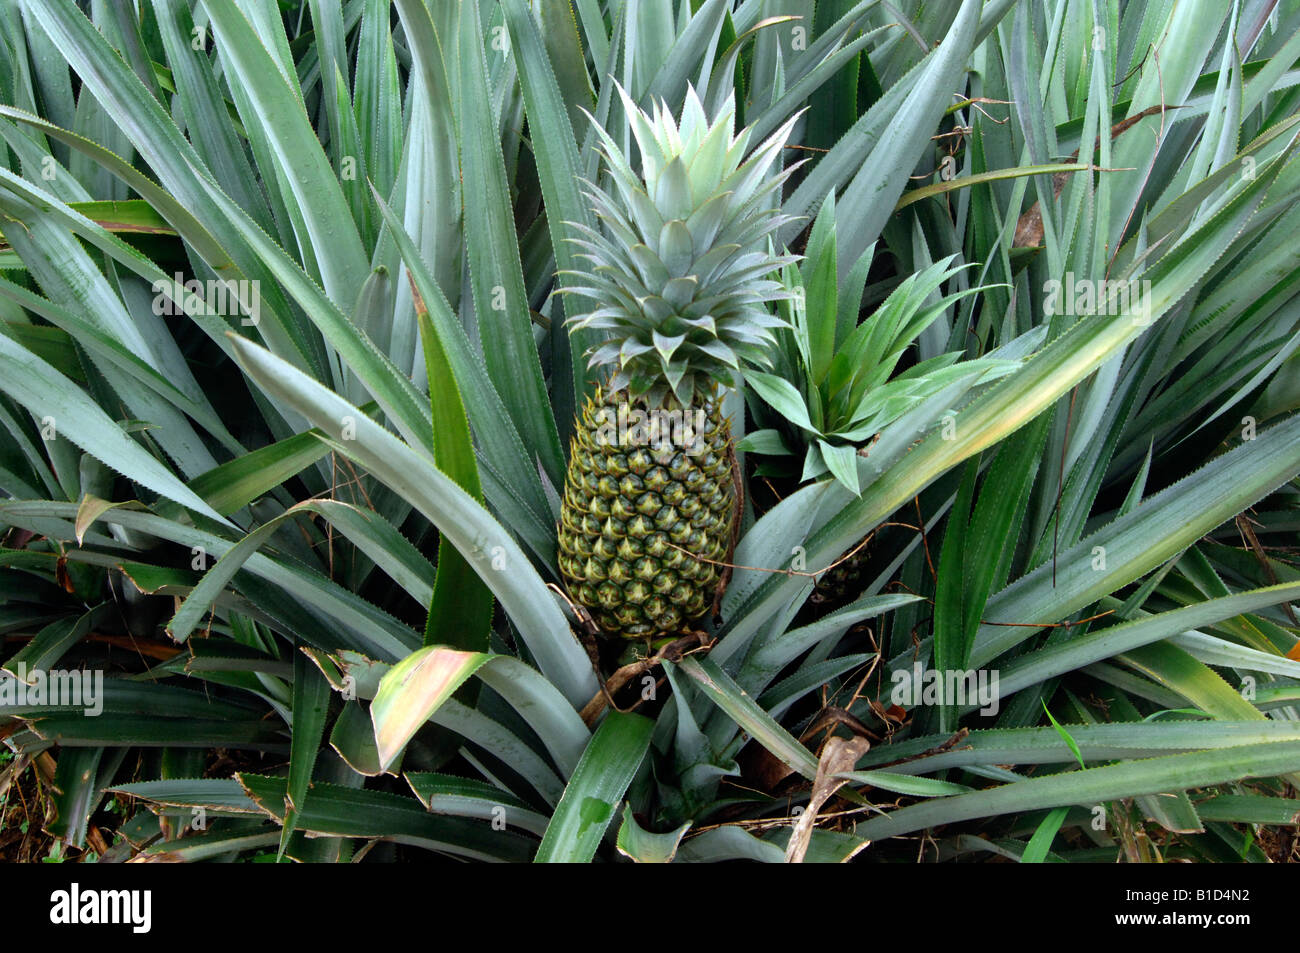 a pineapple (Ananas comosus) on its plant Stock Photo